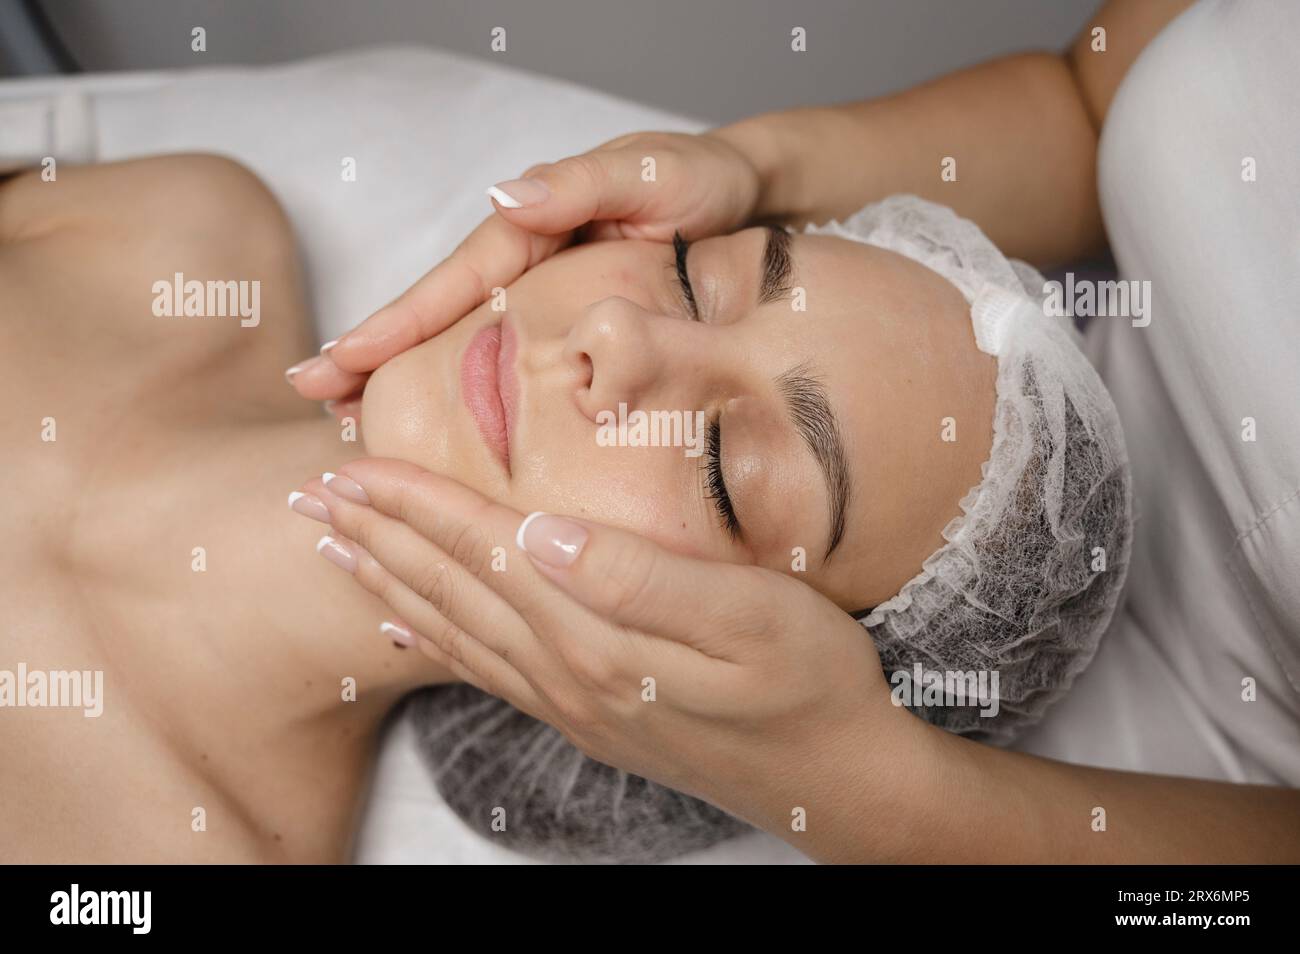 Beautician giving facial massage to young woman with hands Stock Photo